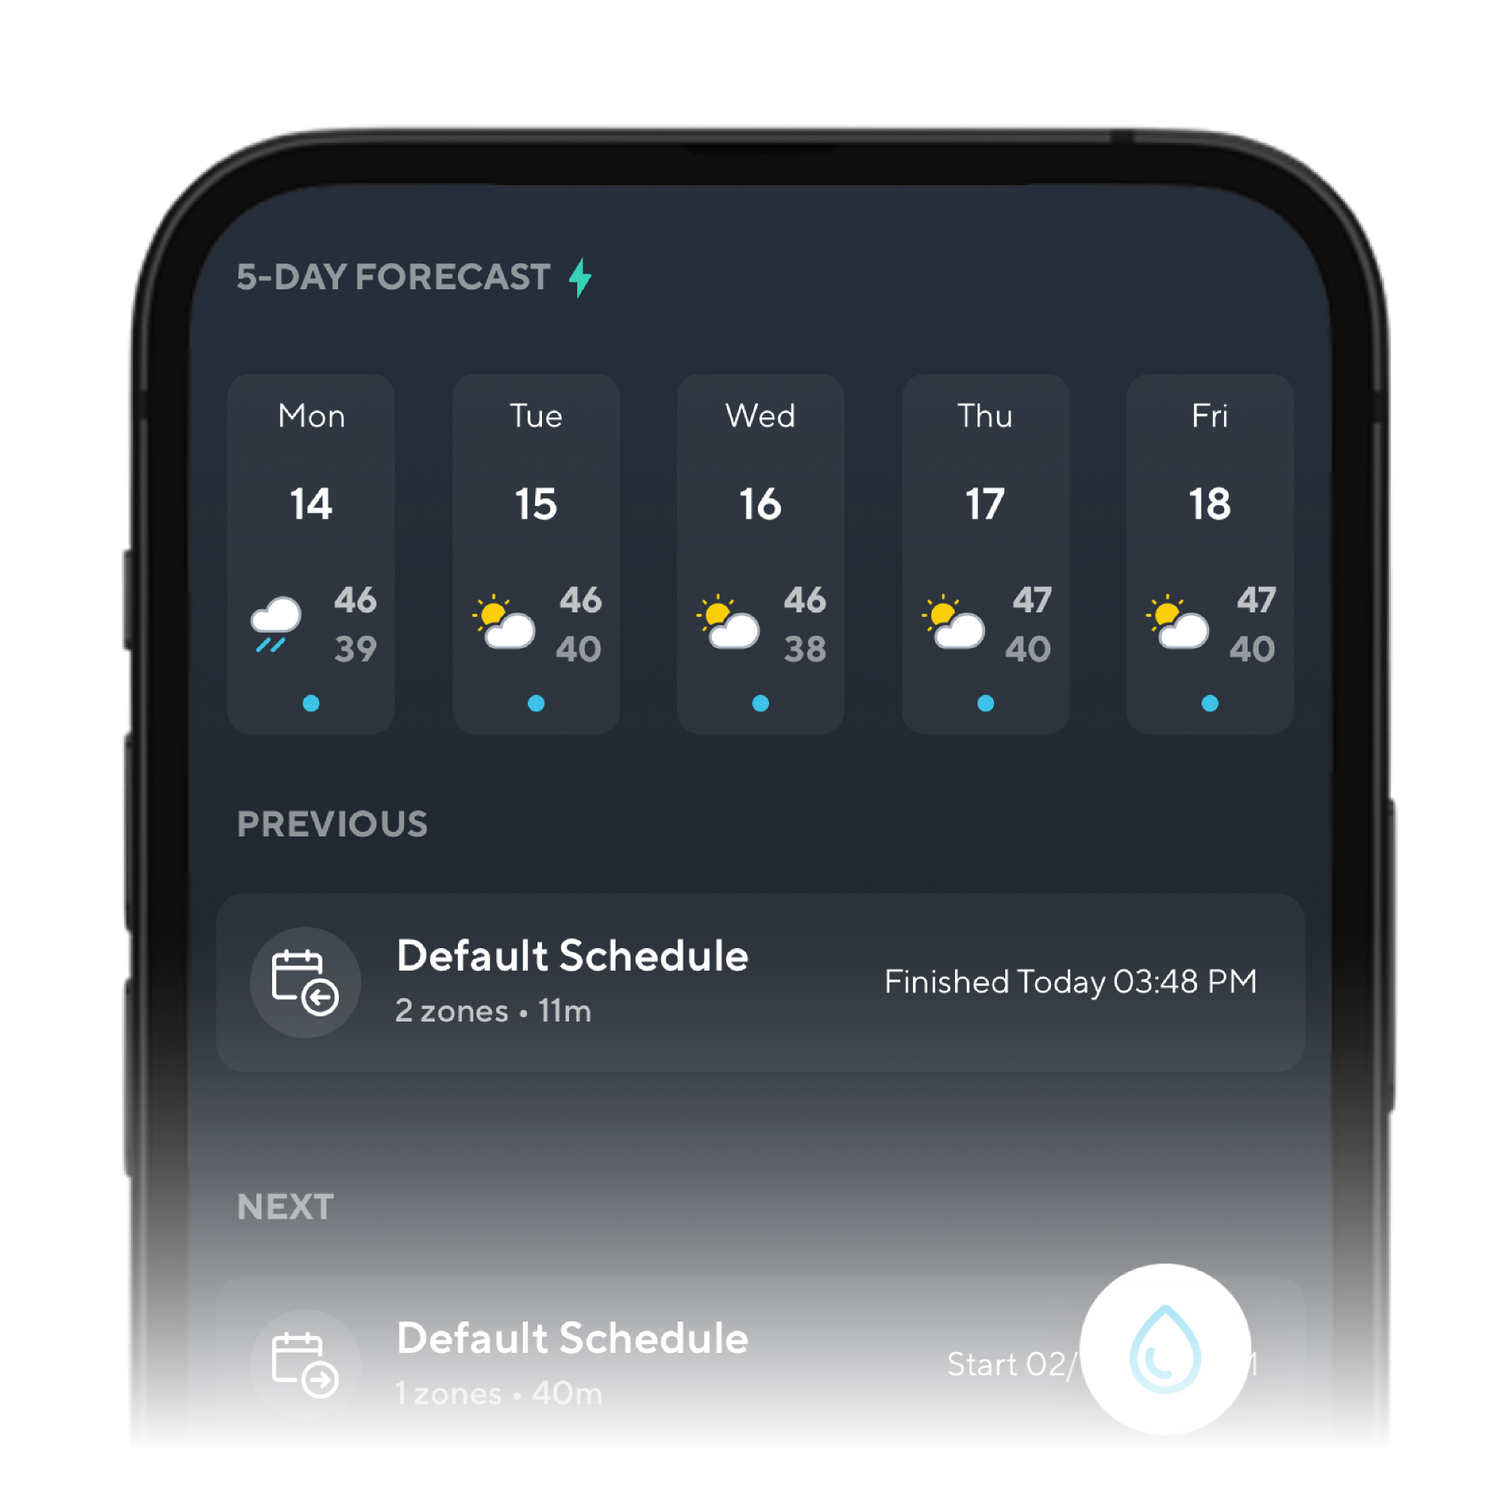 In app sprinkler settings with weather forecast 